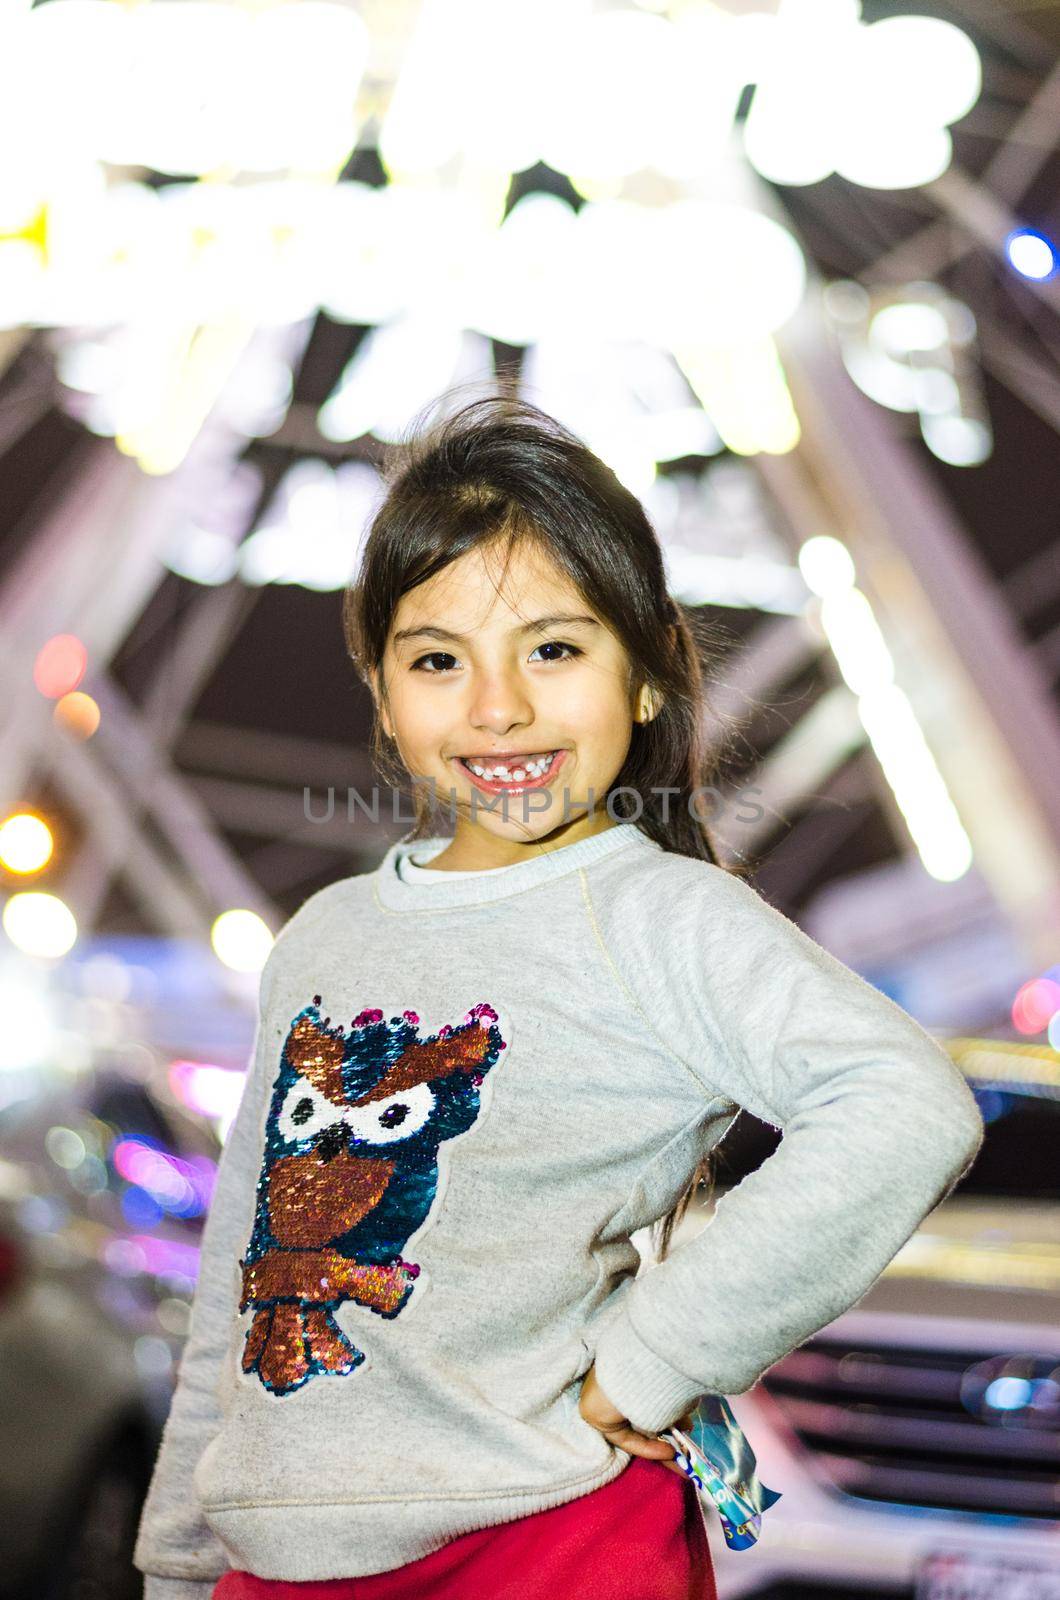 Beautiful happy girl with the background of an amusement park. by Peruphotoart